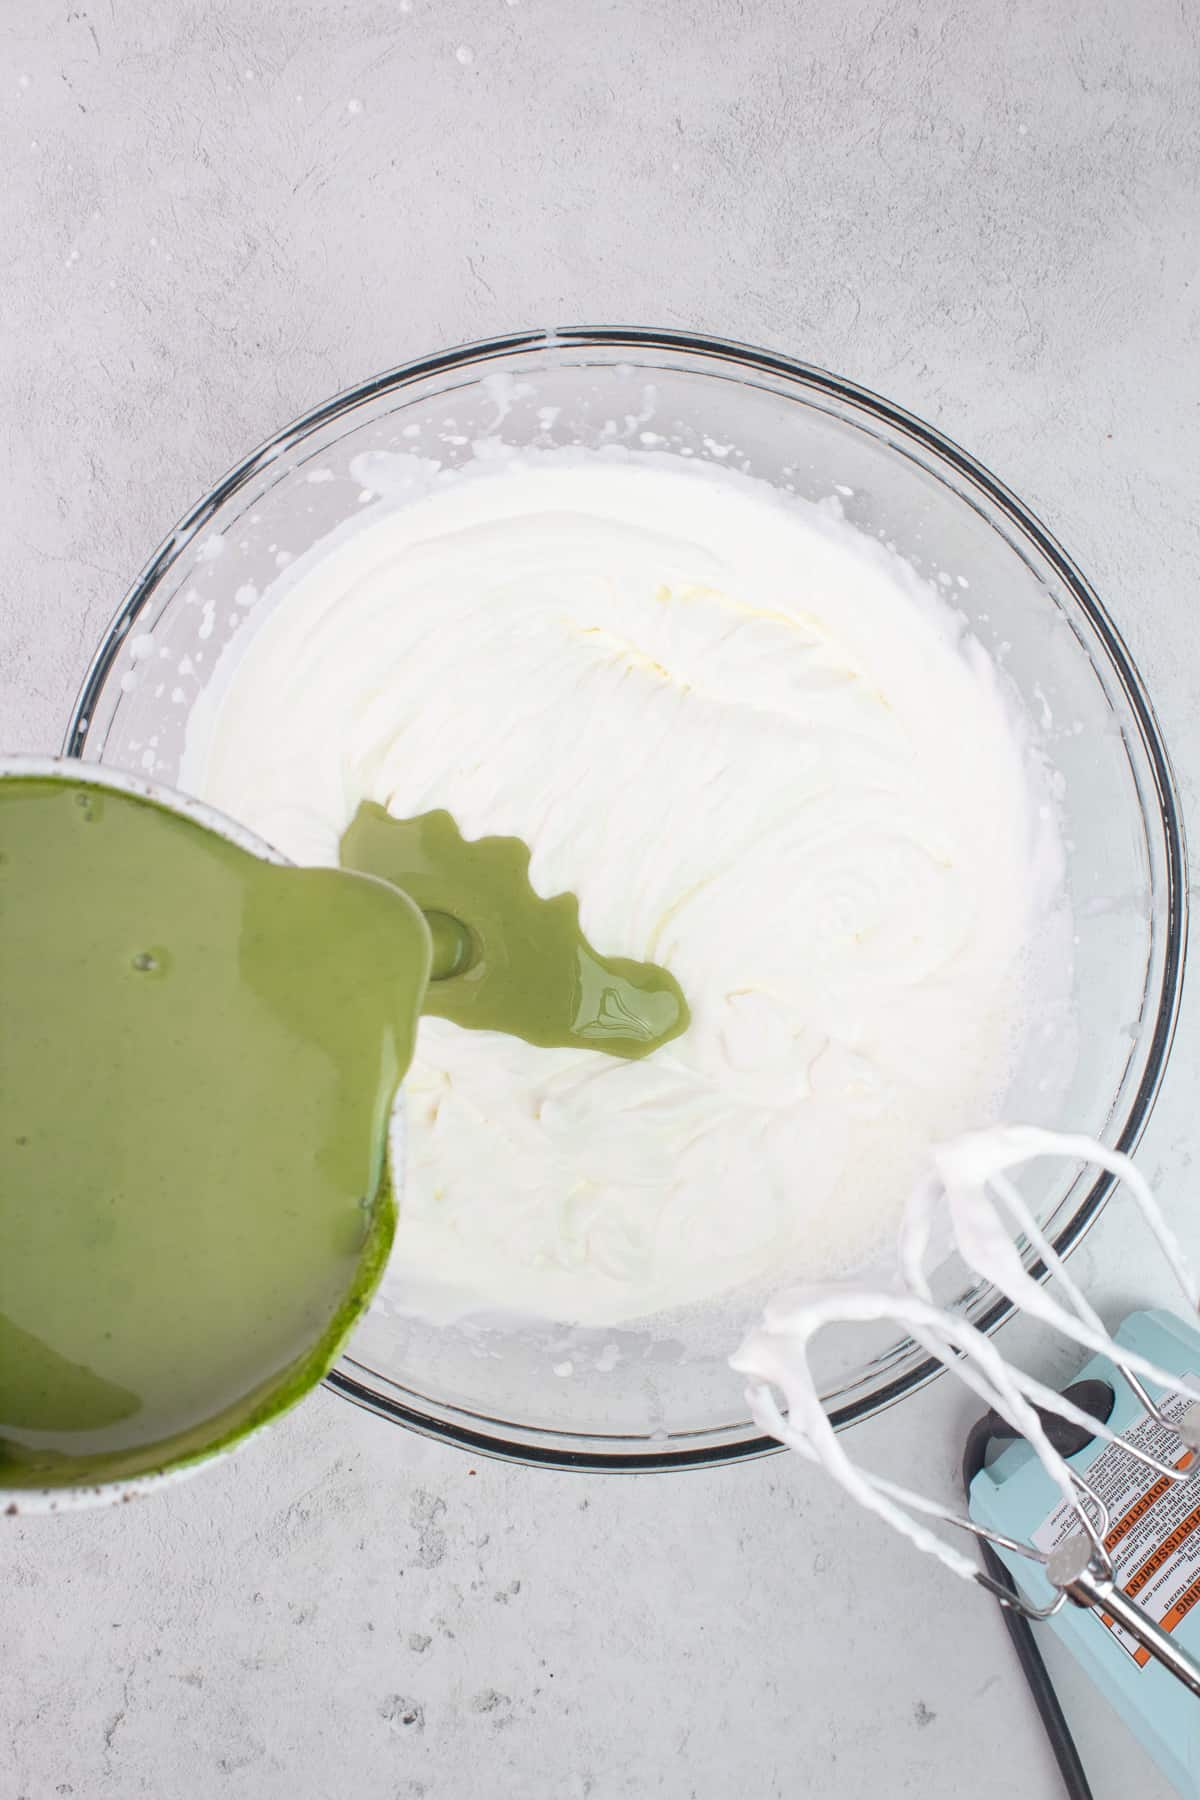 Condensed milk mixture added to large bowl of whipped cream